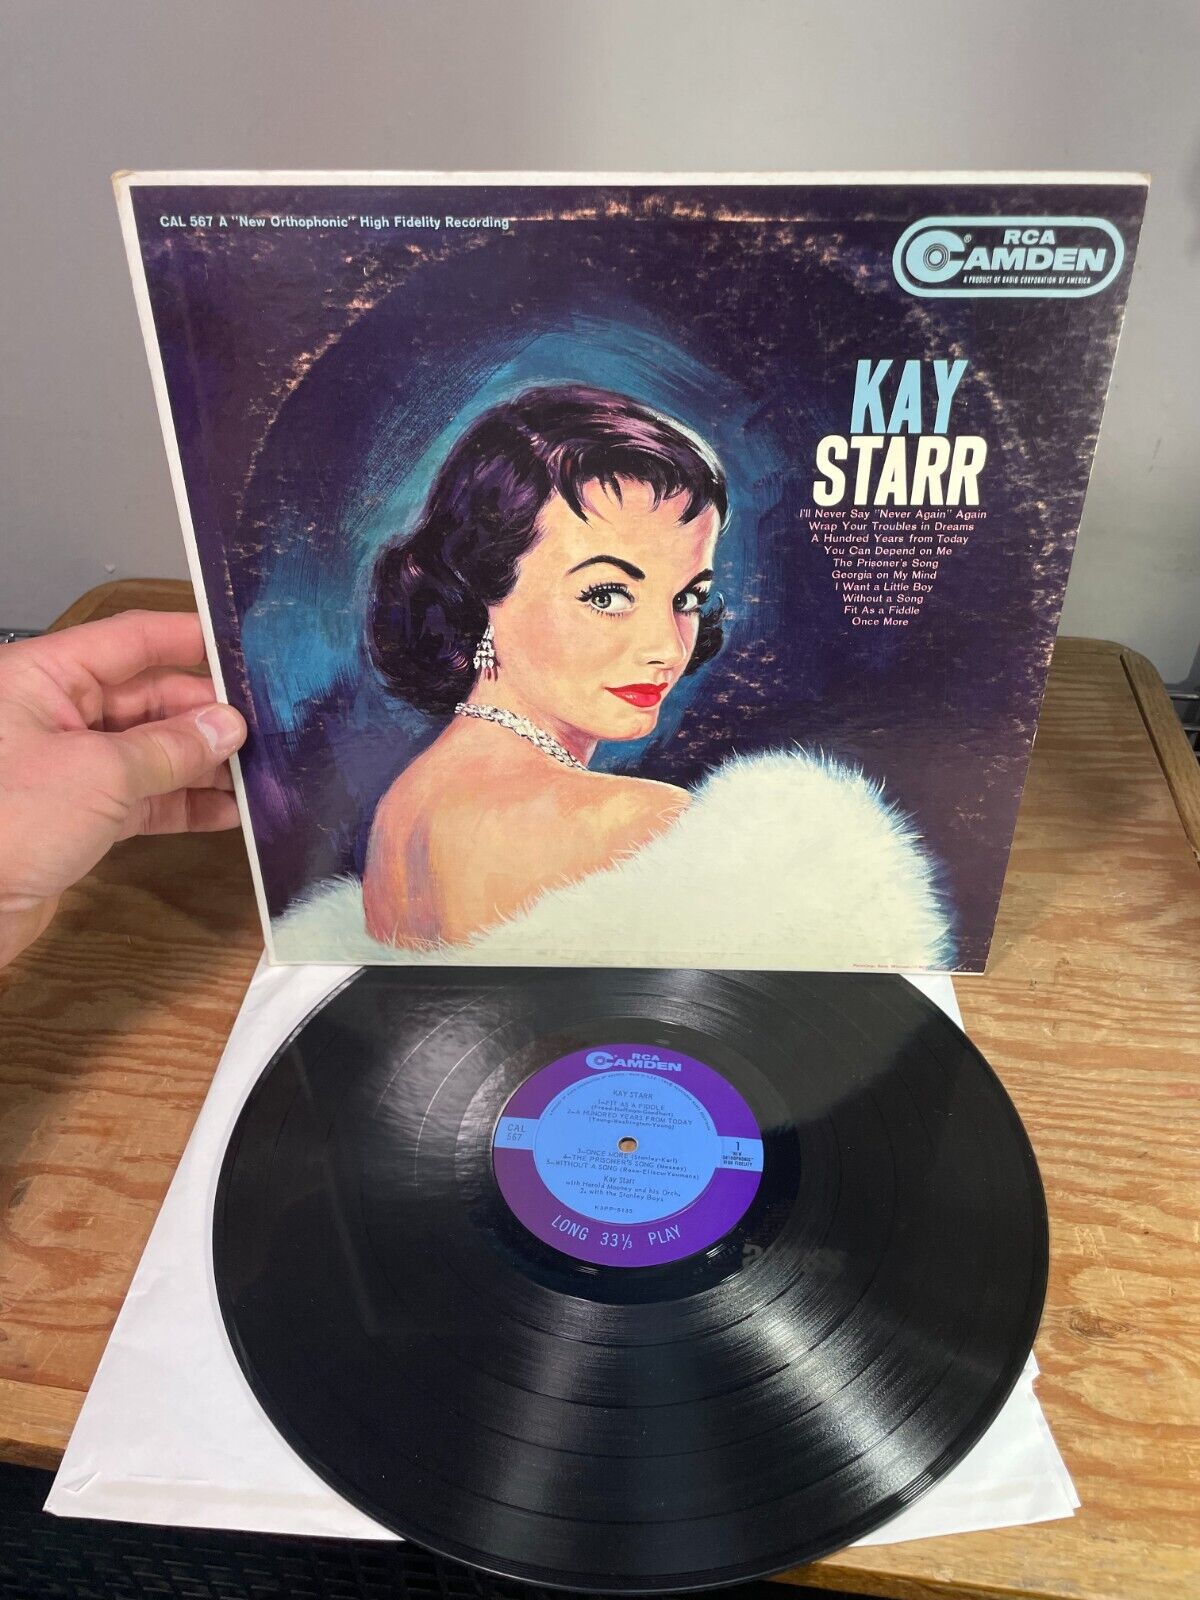 Kay Starr Fit As A Fiddle RCA Camden